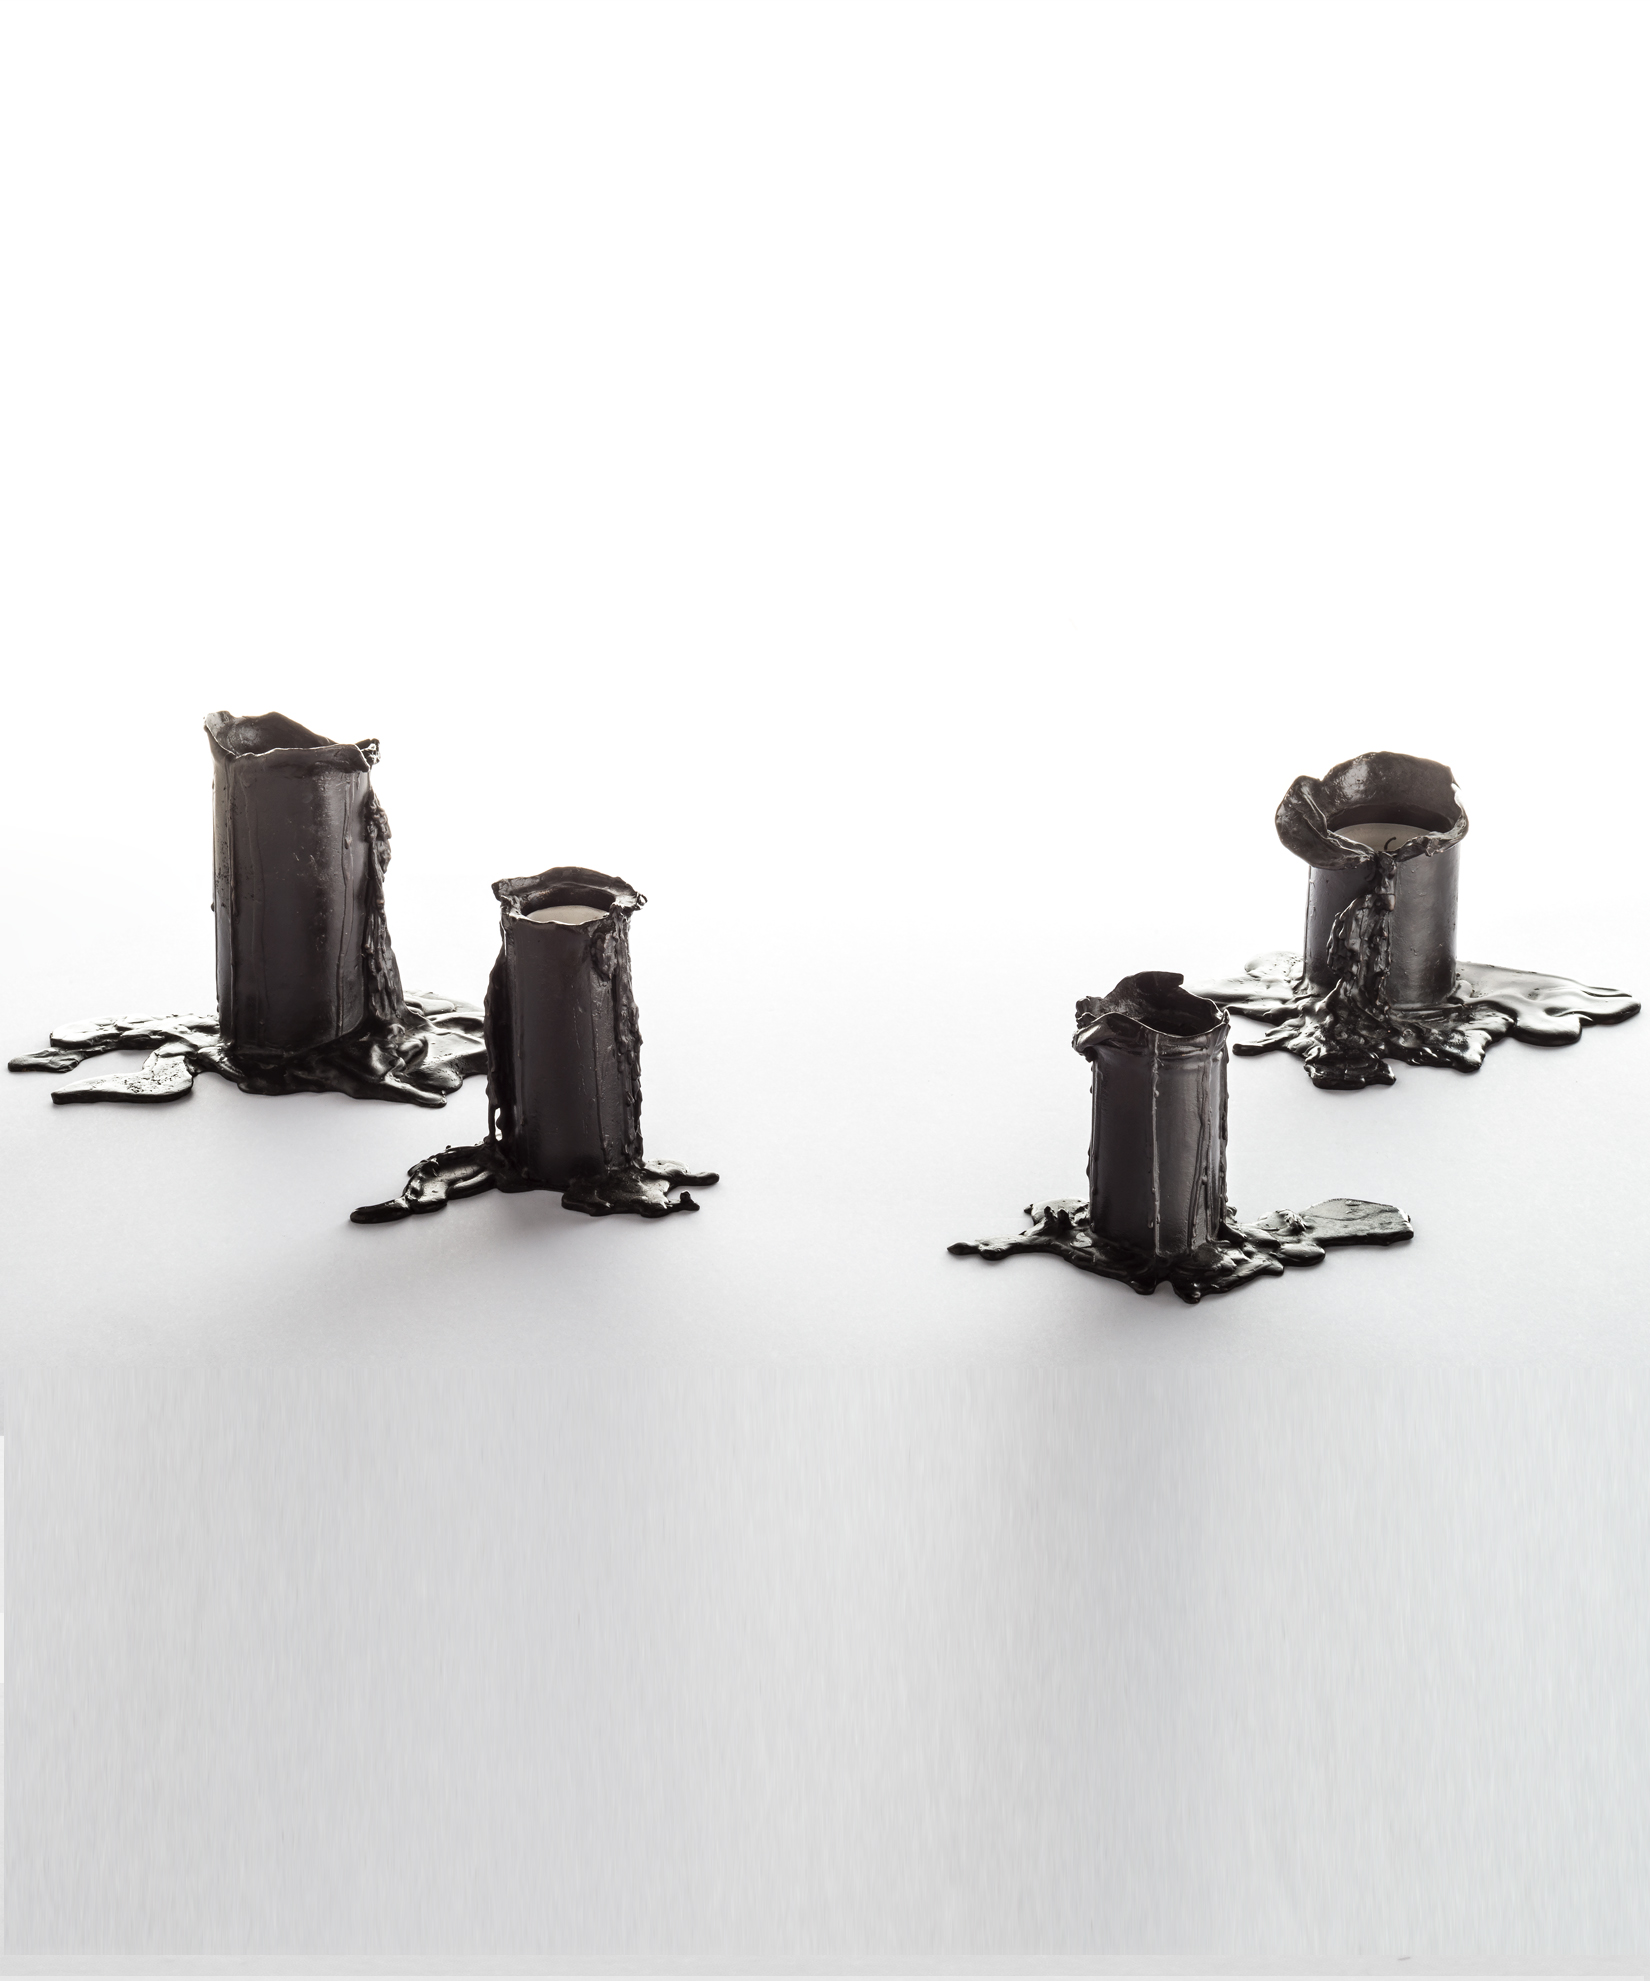 Immagine prodotto Melted Candle Holders in Bronze with Black Patina – Set of 4 Osanna Visconti